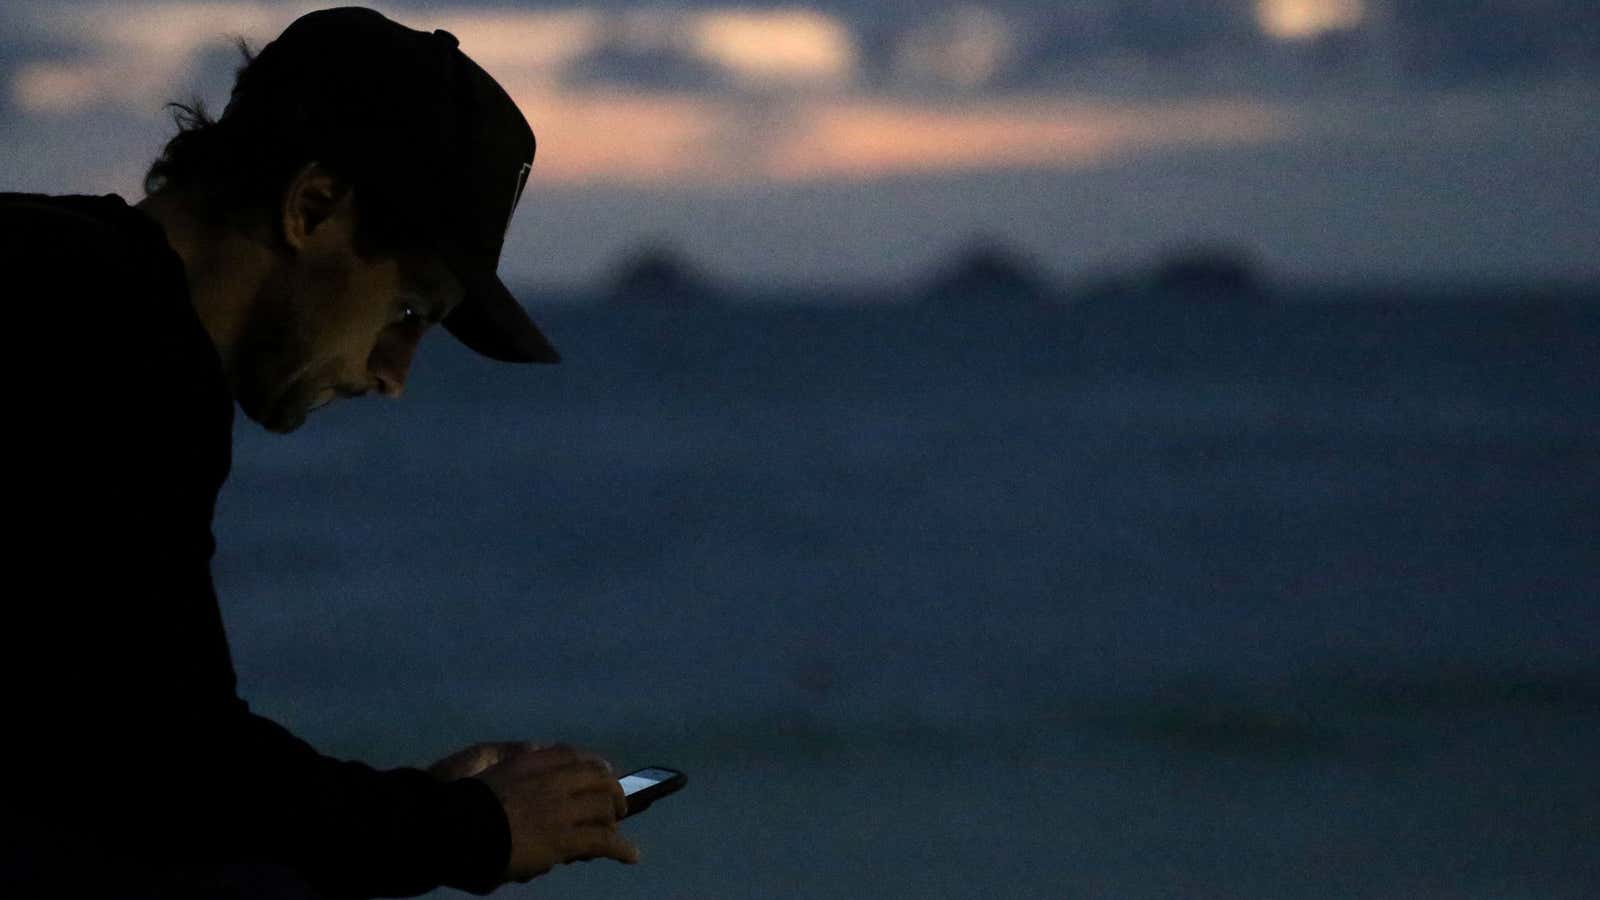 A man uses his phone in Rio.